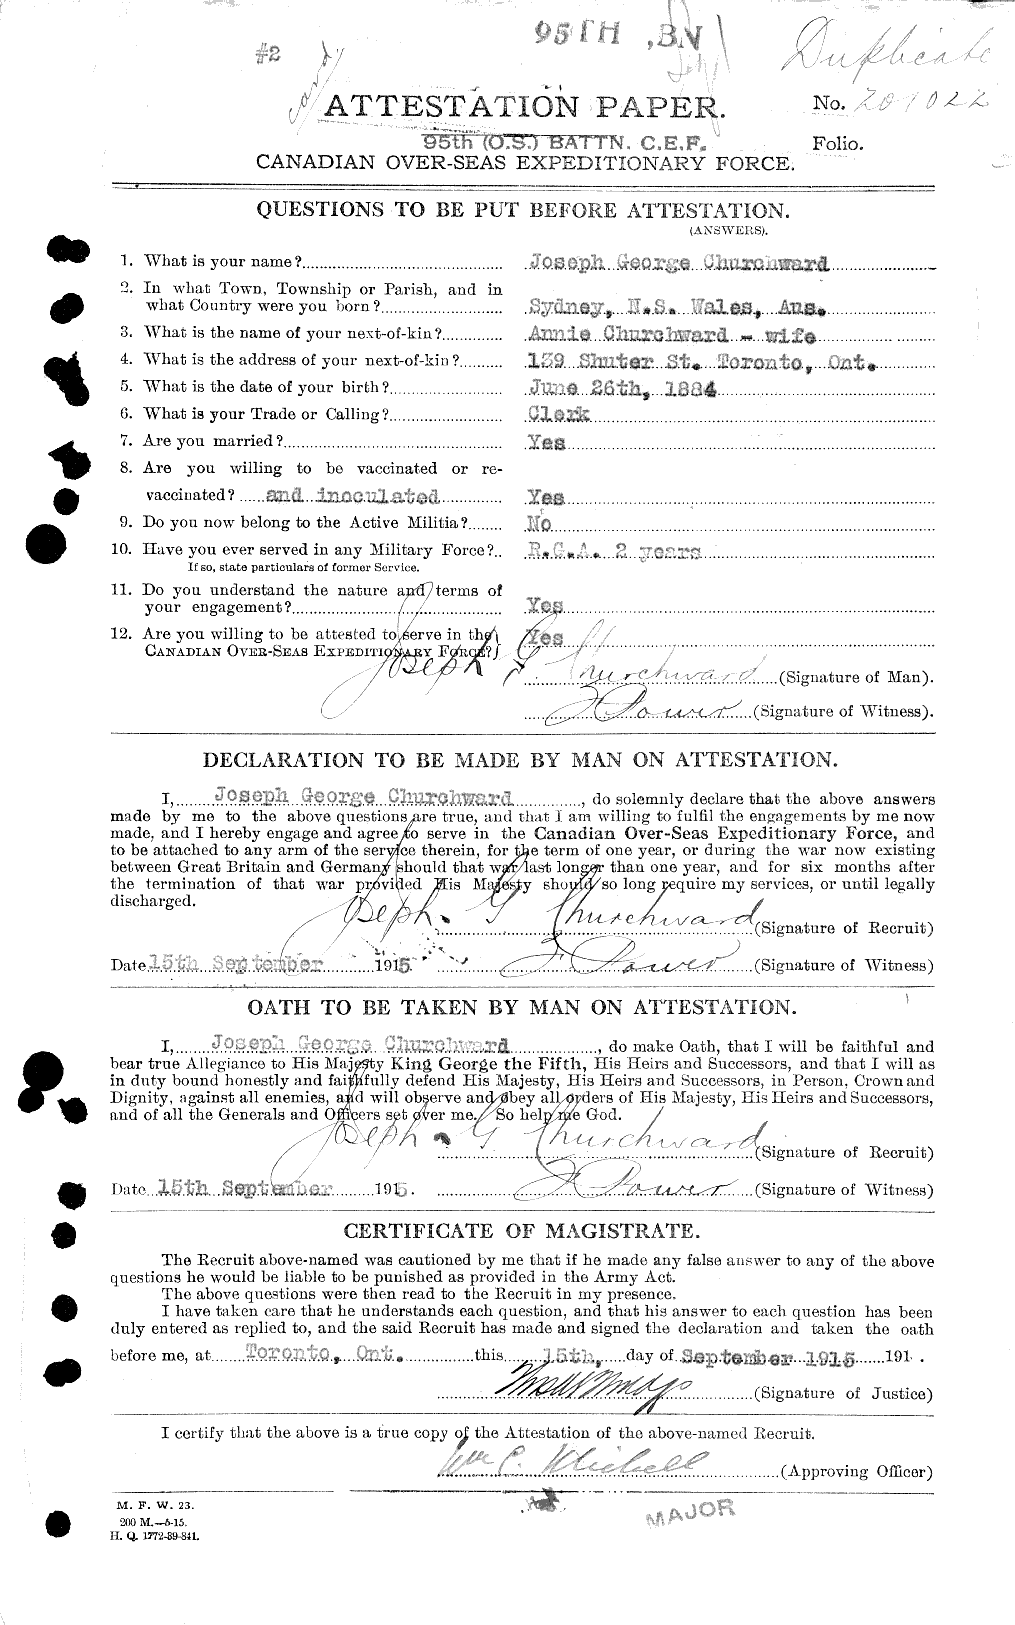 Personnel Records of the First World War - CEF 022518a